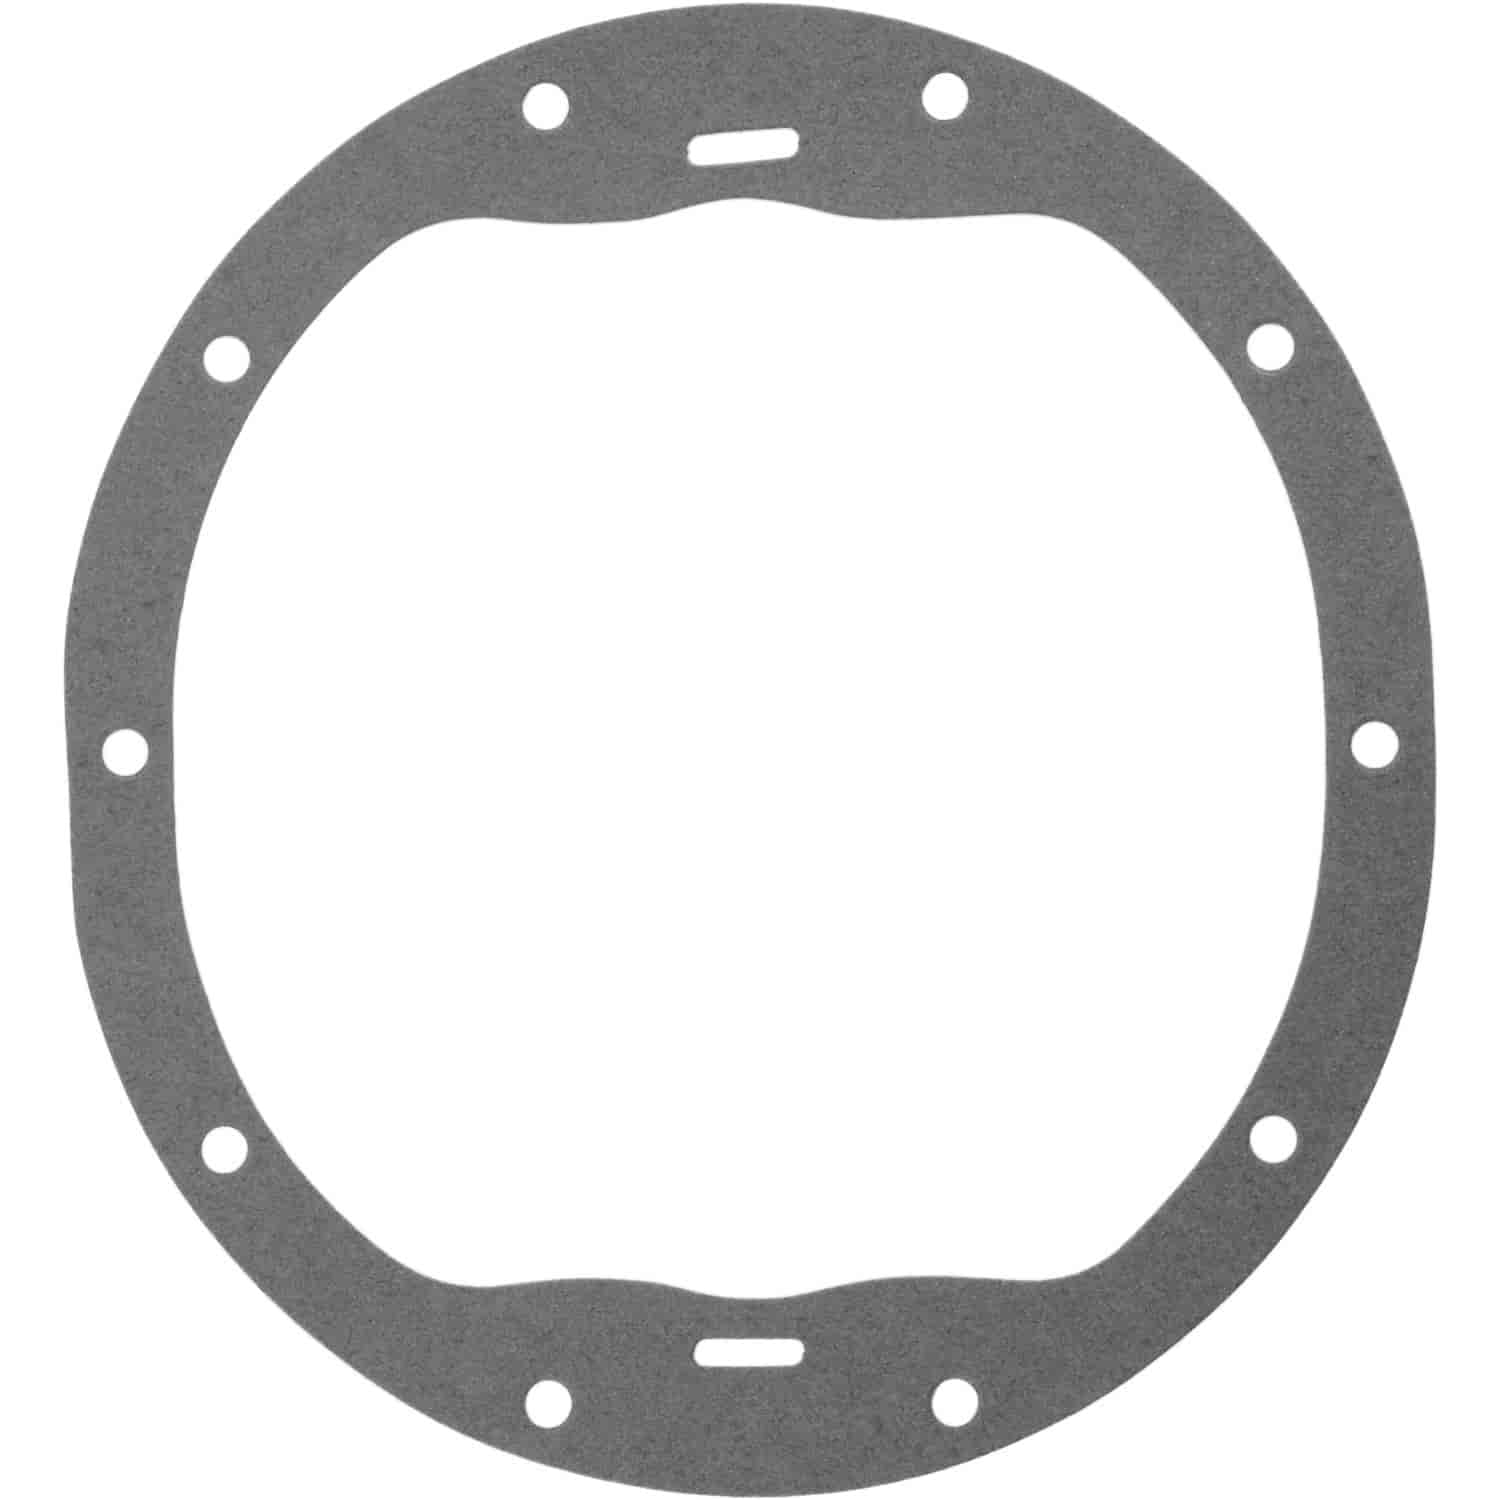 Differential Cover Gasket Chevy 10-Bolt Intermediate